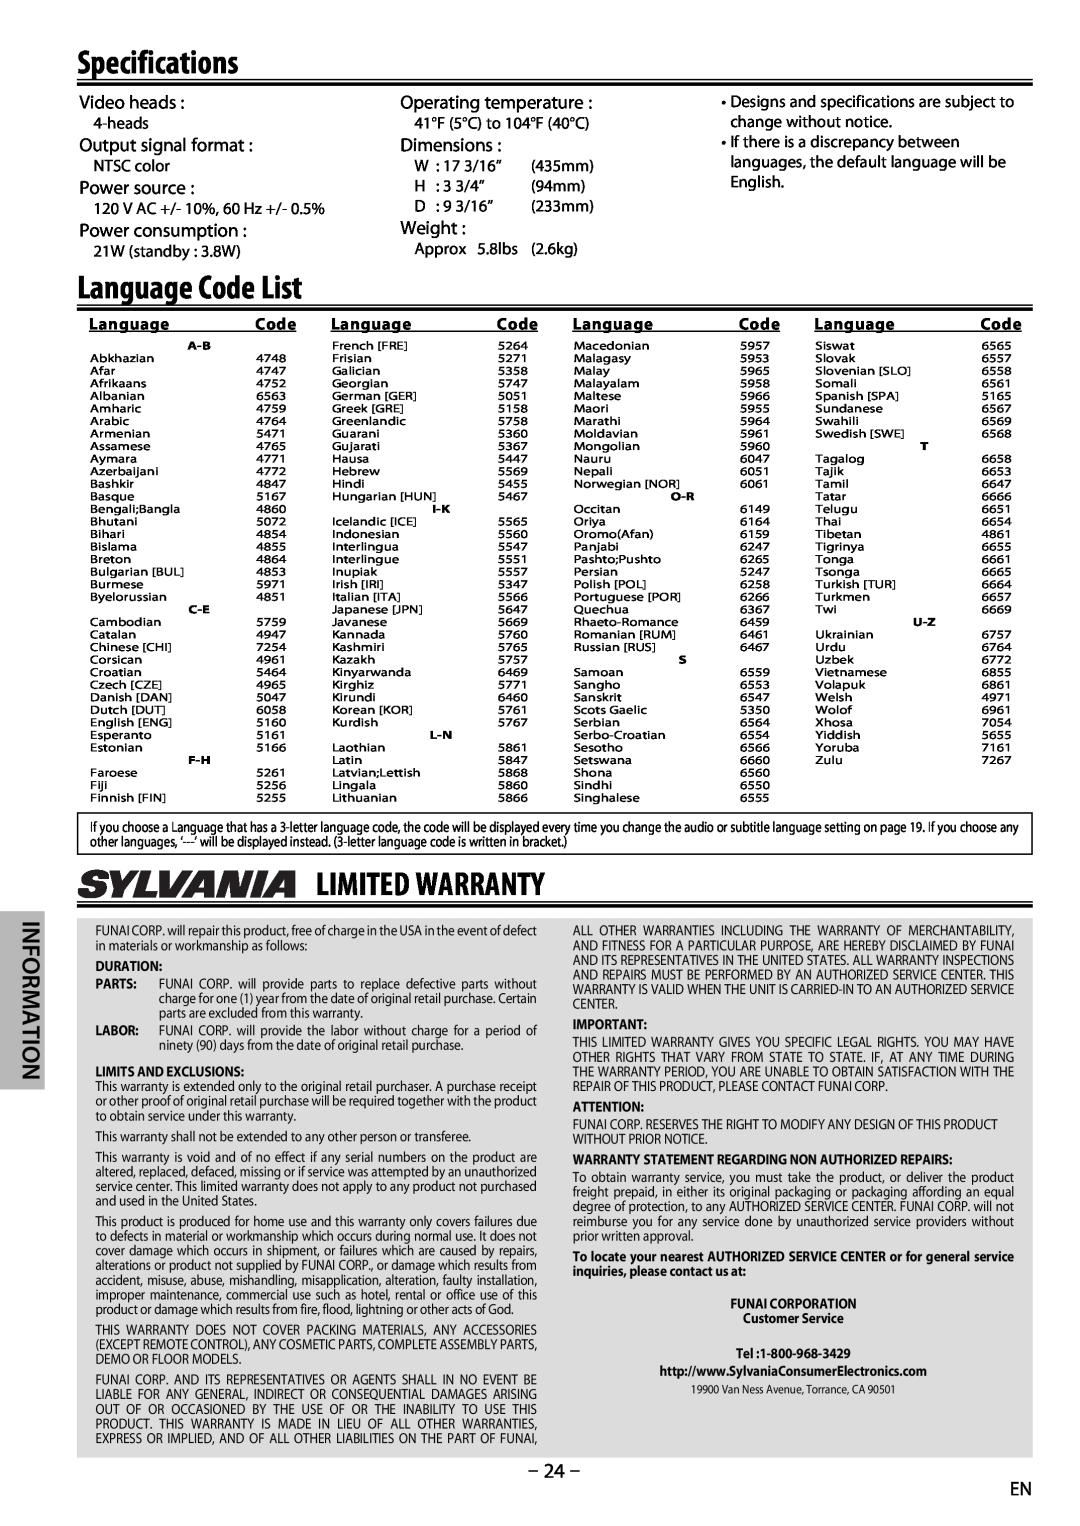 Sylvania dv220sl8 owner manual Specifications, Limited Warranty, Language Code List, Information 